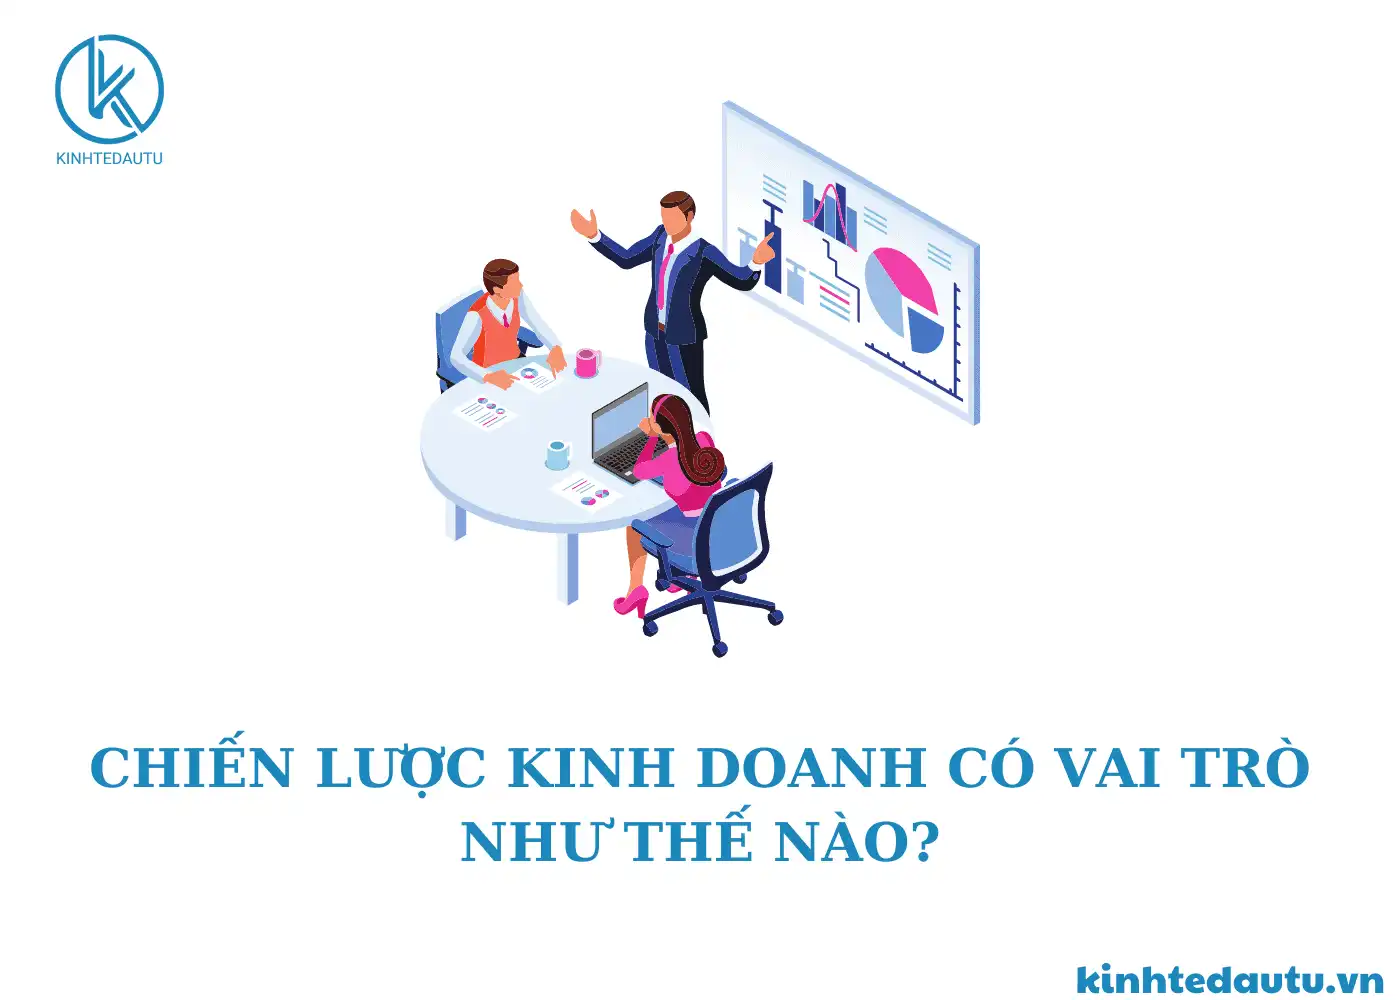 Chien-luoc-kinh-doanh-dong-vai-tro-nhu-the-nao